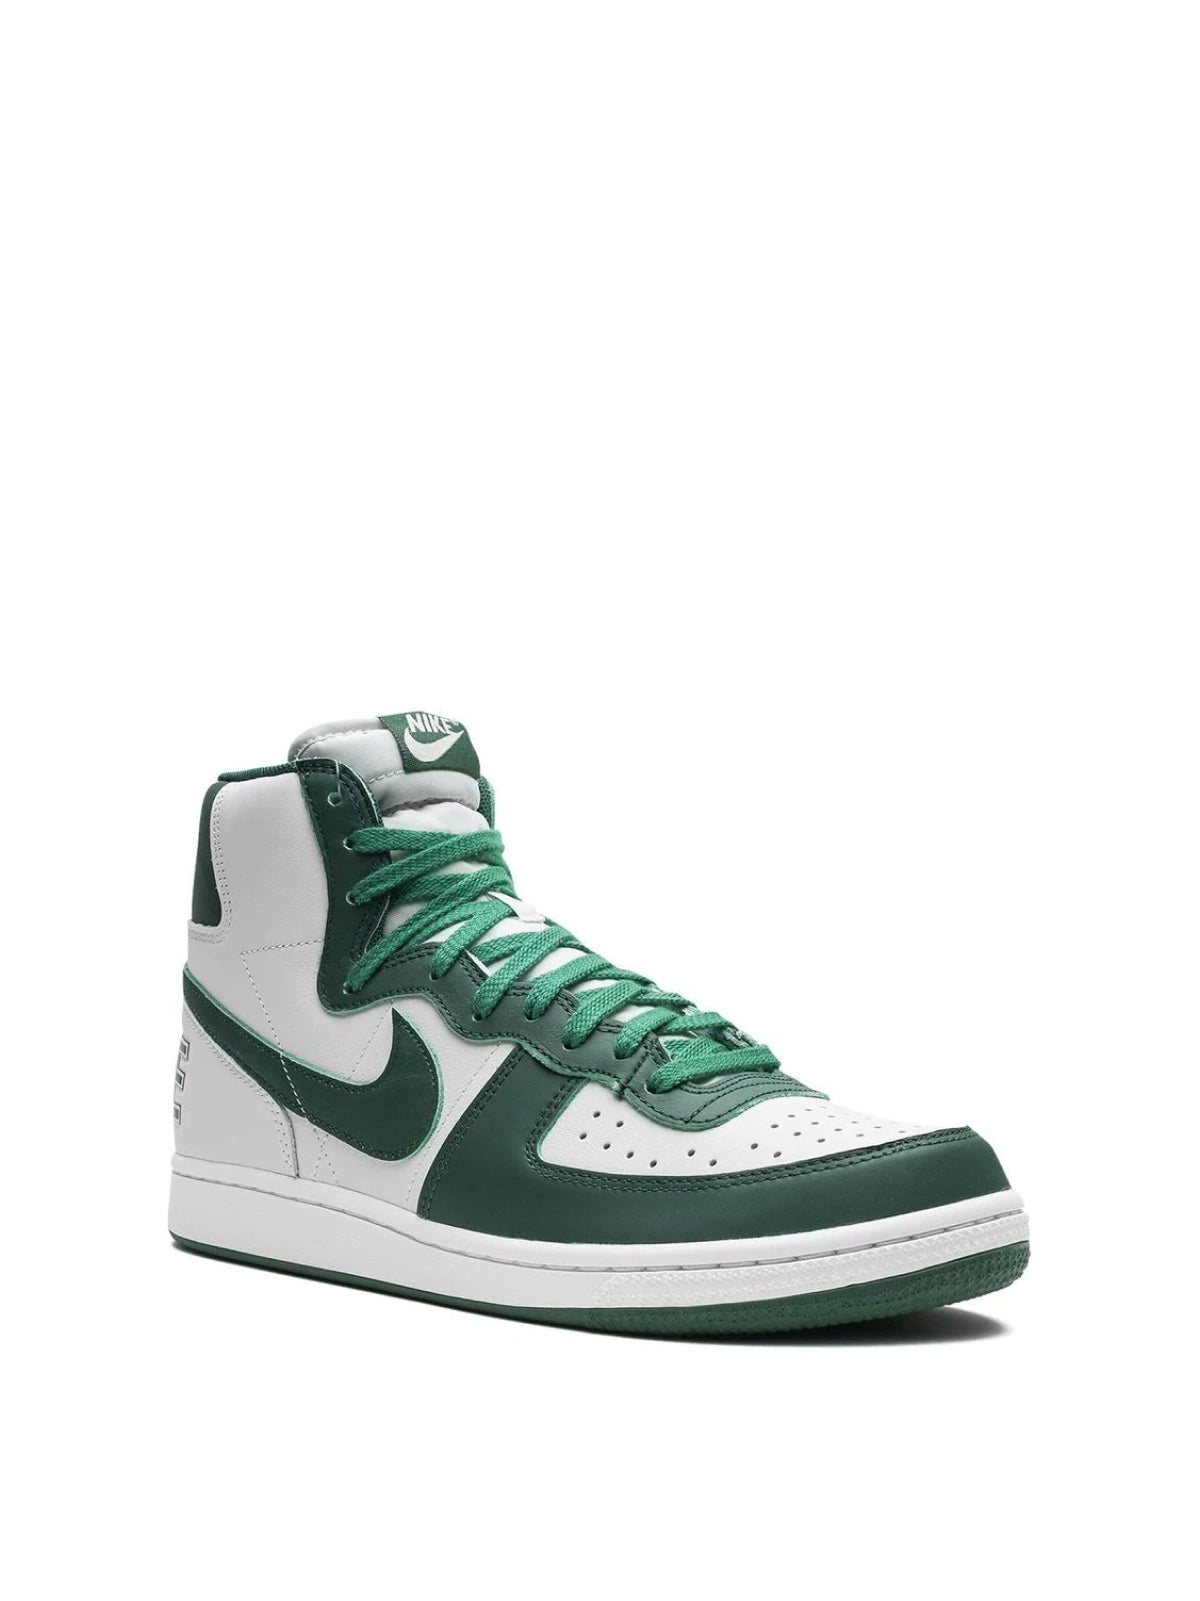 Nike-OUTLET-SALE-Terminator High Sneakers-ARCHIVIST